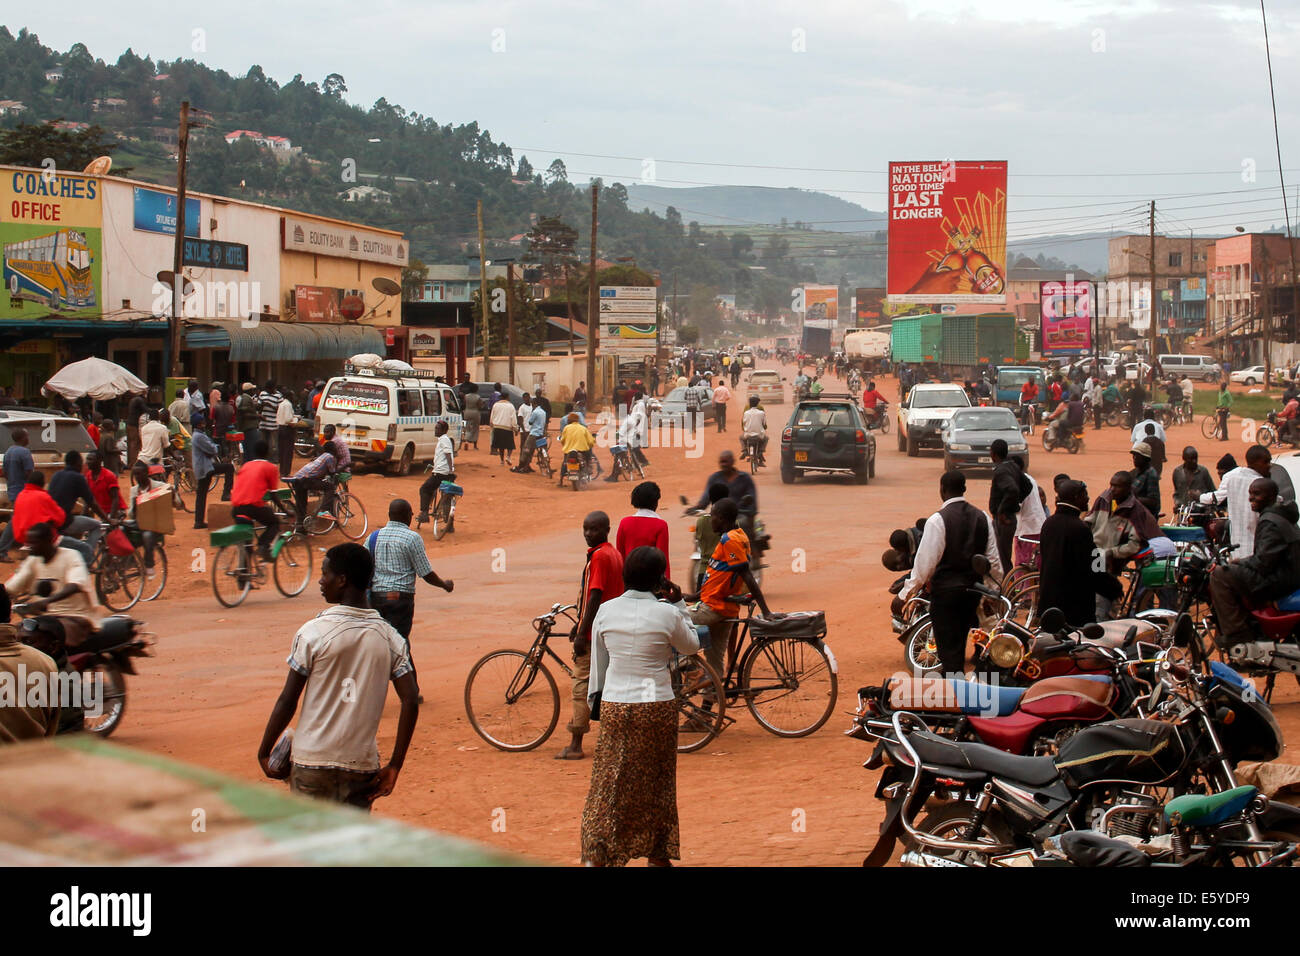 Dusk approaches in the town of Kabale as locals begin to return home after a day's work. Stock Photo